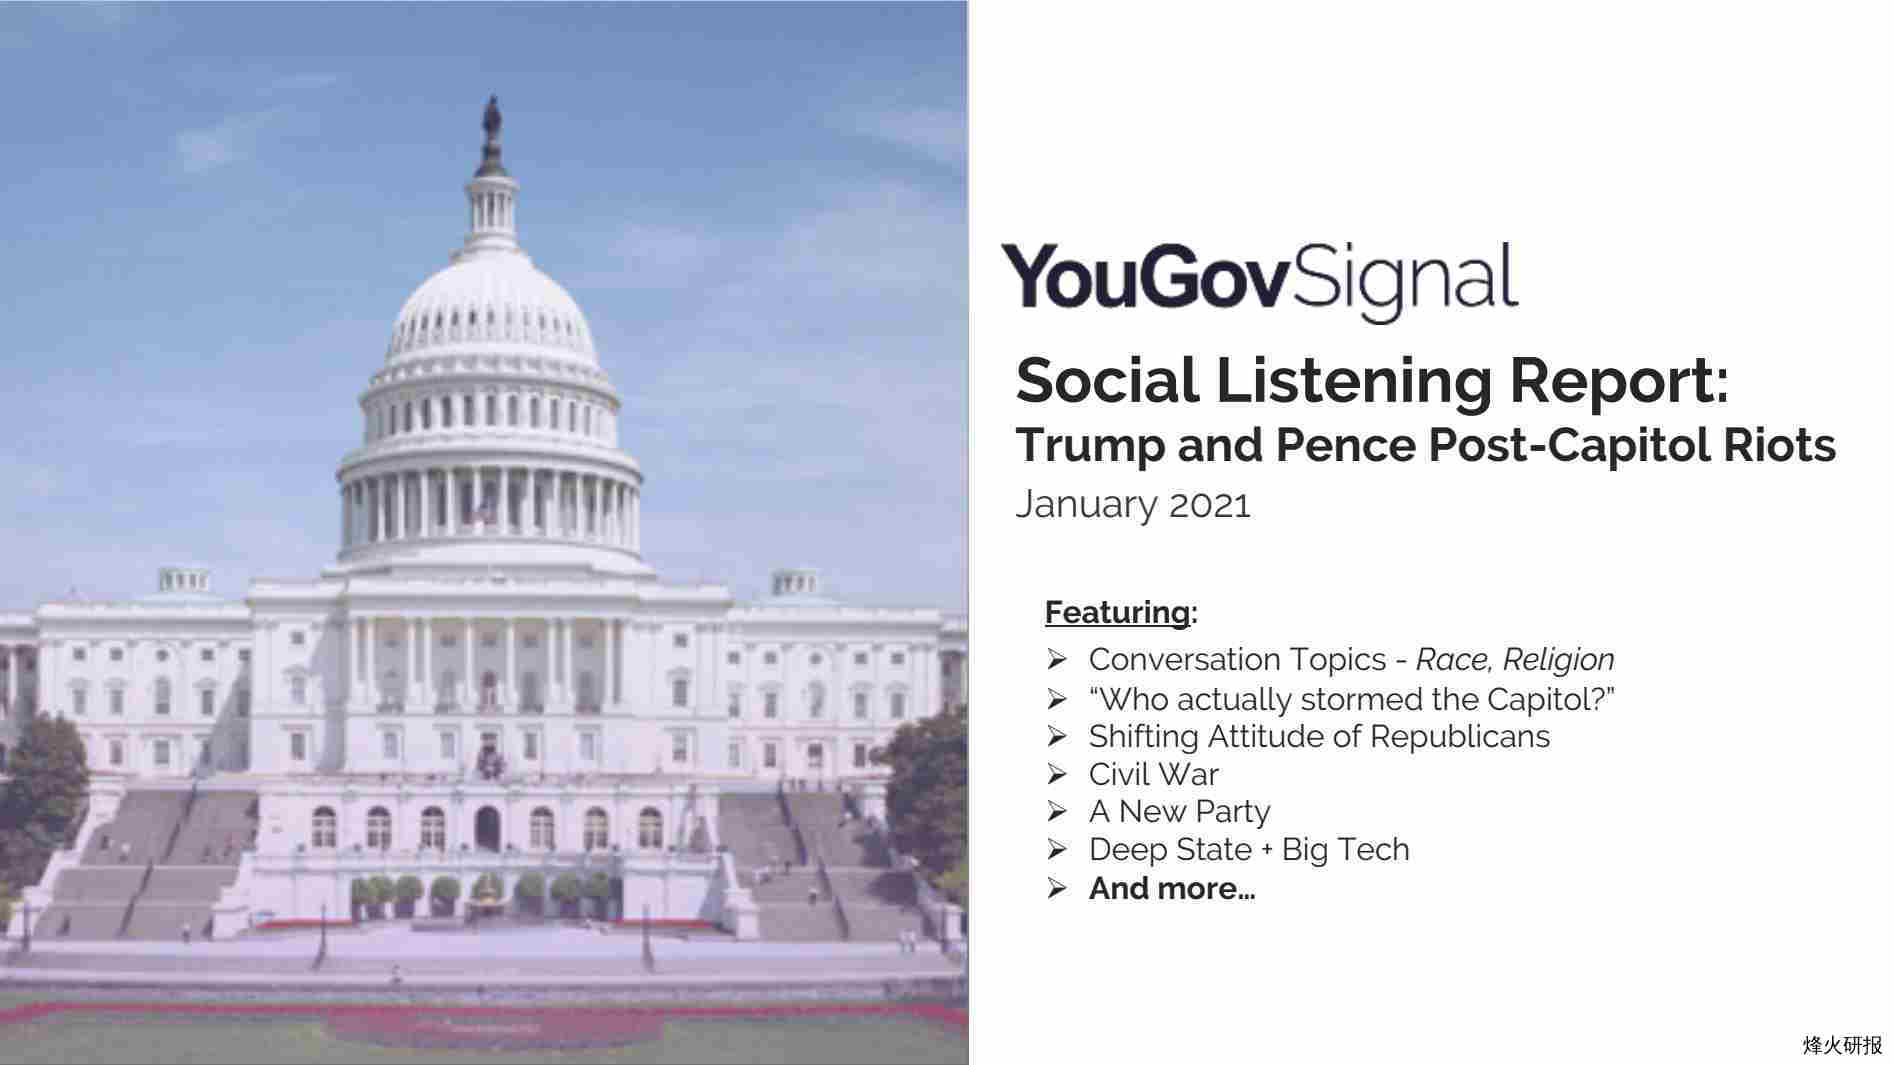 【YouGov】Social Listening Report - Trump and Pence Post-Capitol Riots.pdf-第一页